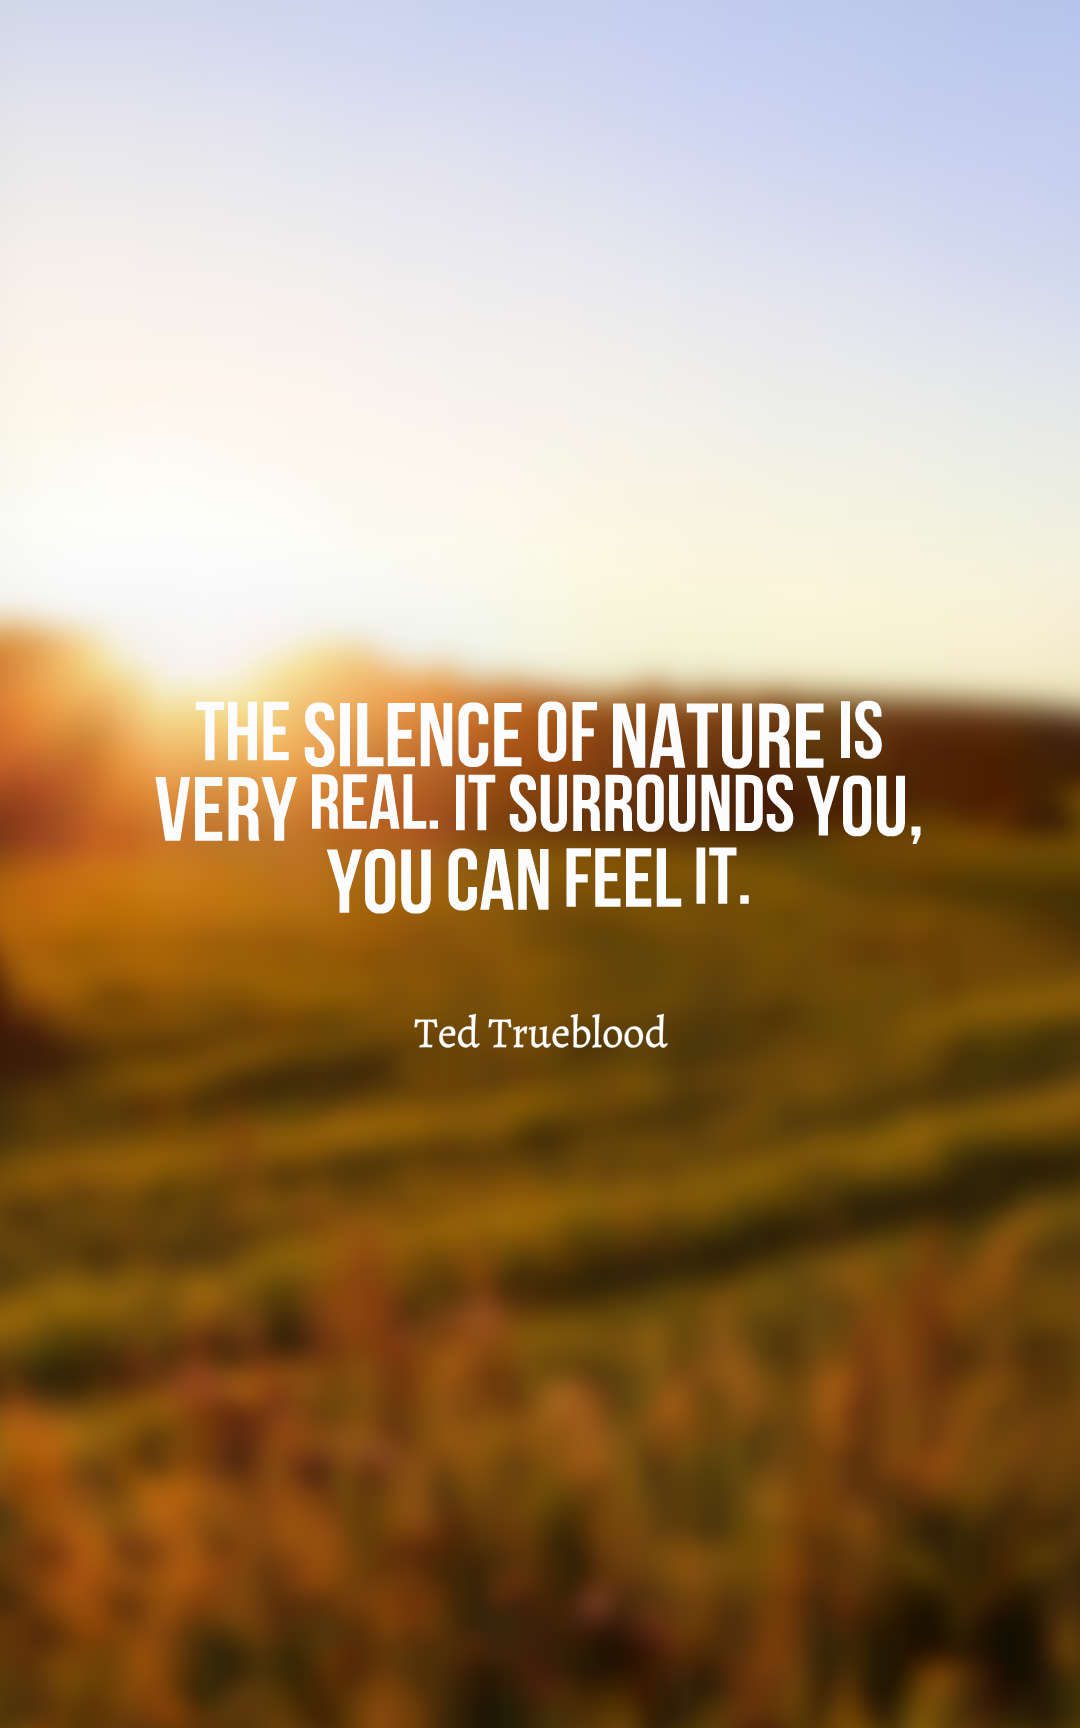 The silence of nature is very real. It surrounds you, you can feel it.